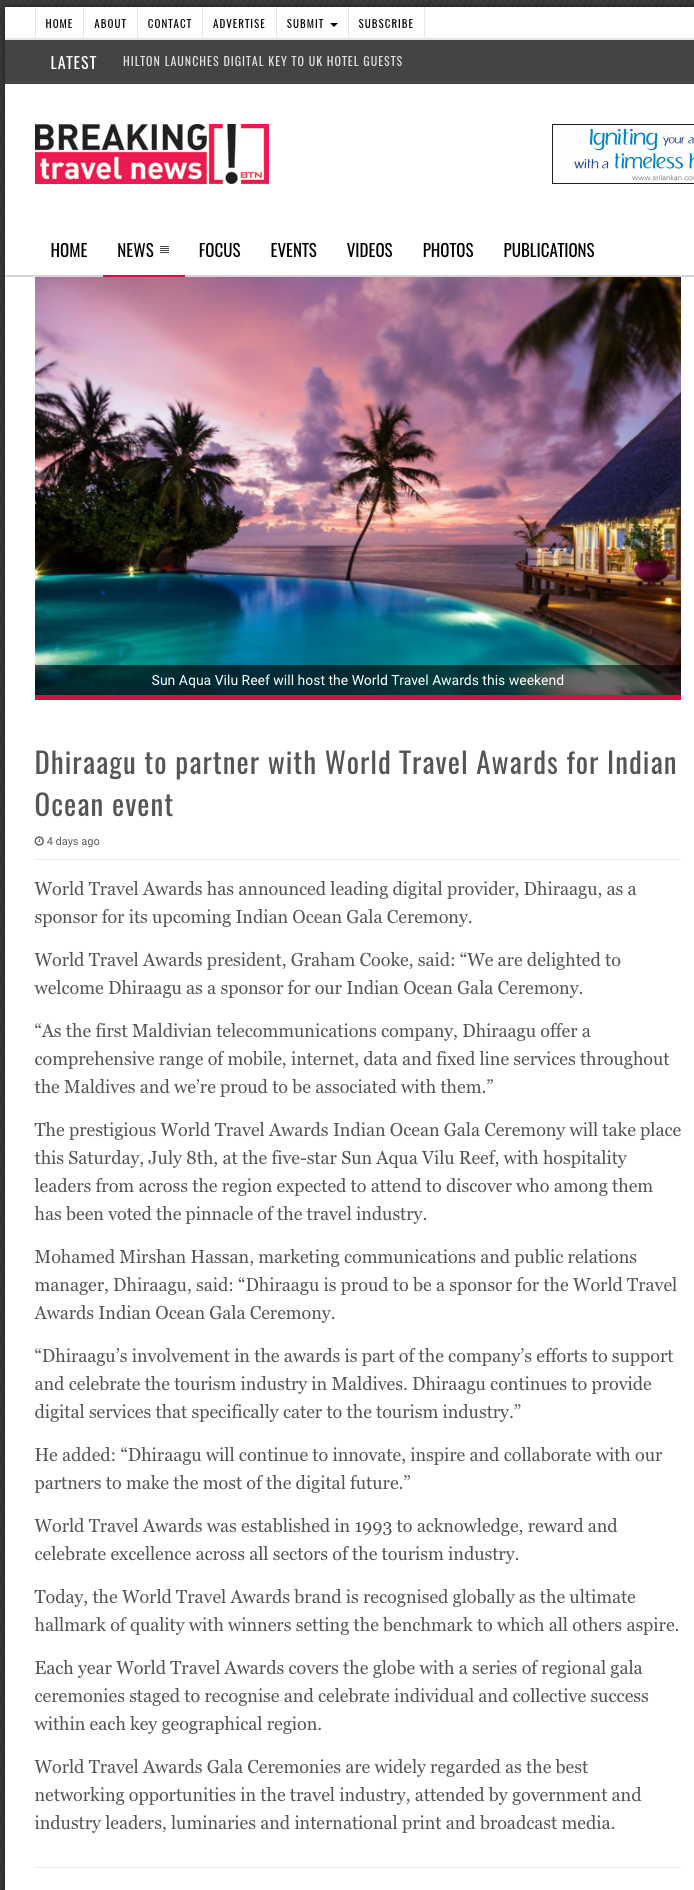 Dhiraagu to partner with World Travel Awards for Indian Ocean event